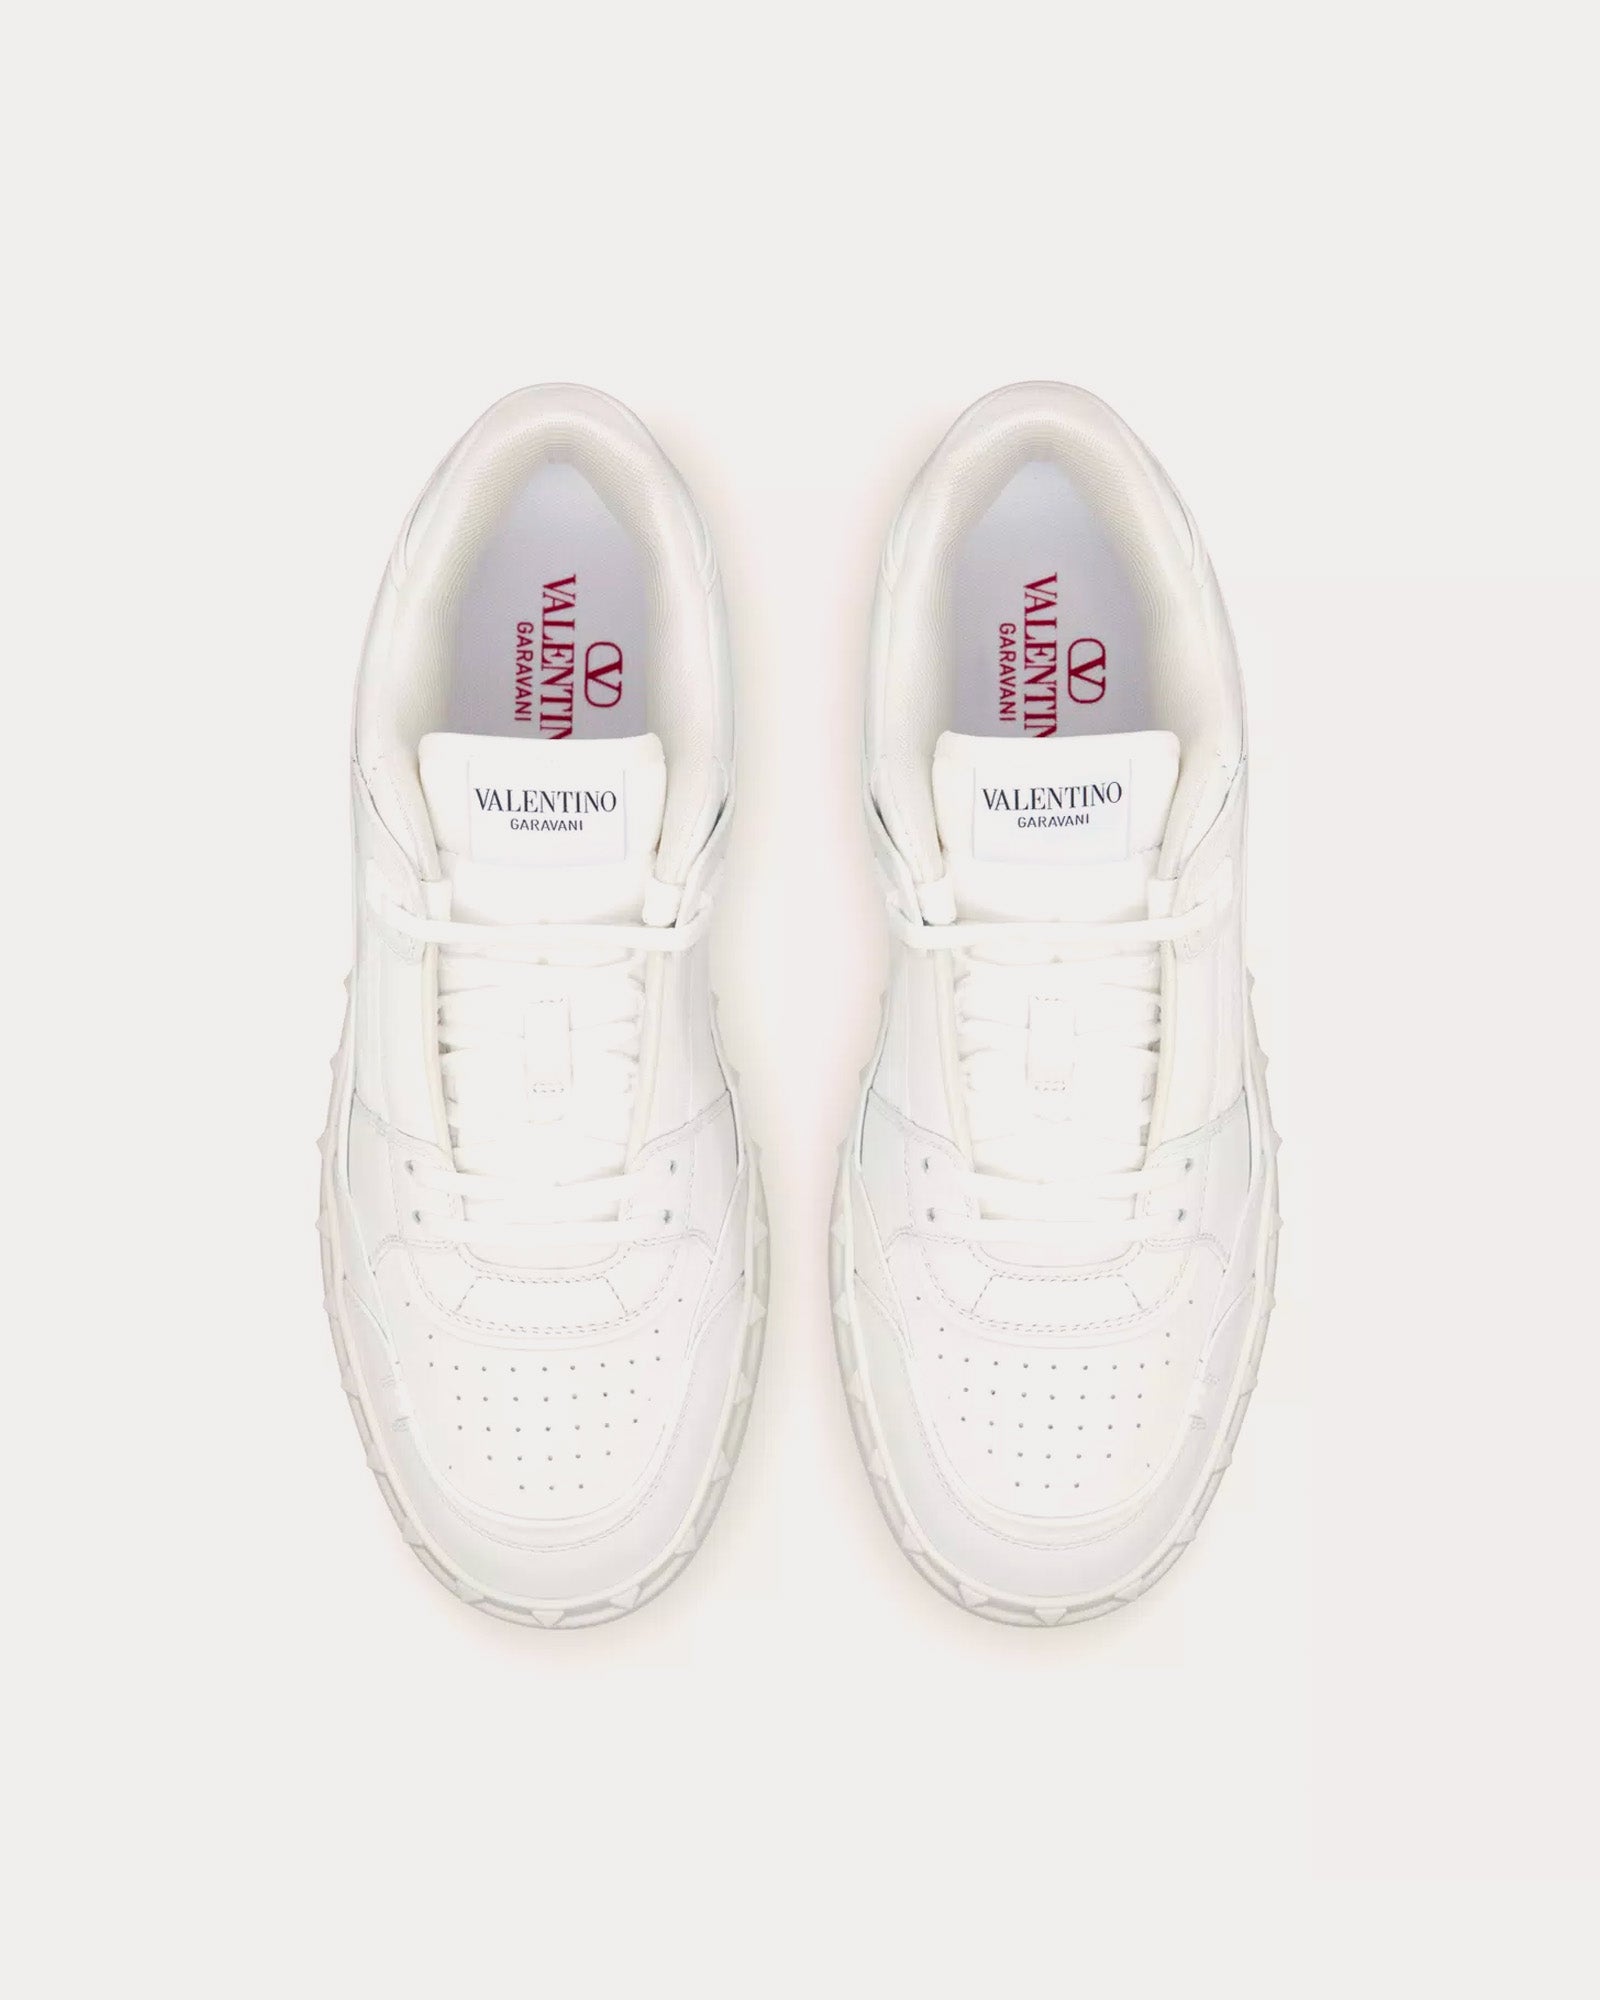 Valentino - Freedots Calfskin White Low Top Sneakers